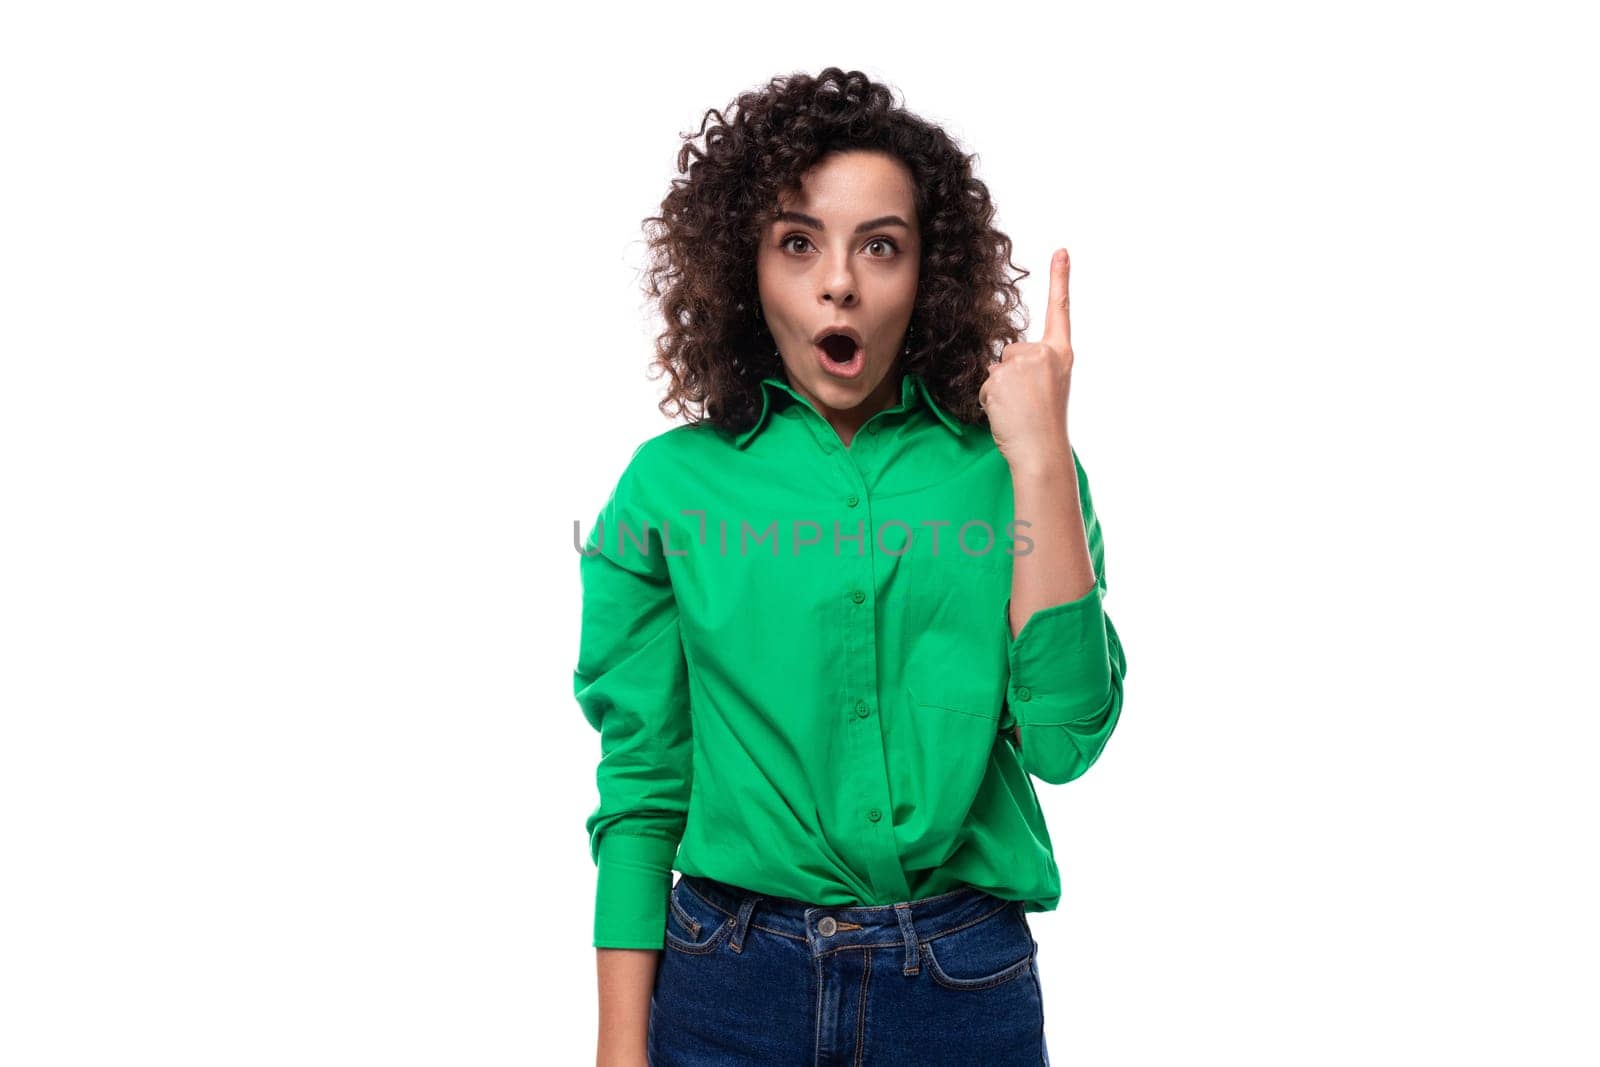 surprised young woman with black curly hair dressed in a green blouse points her fingers up.